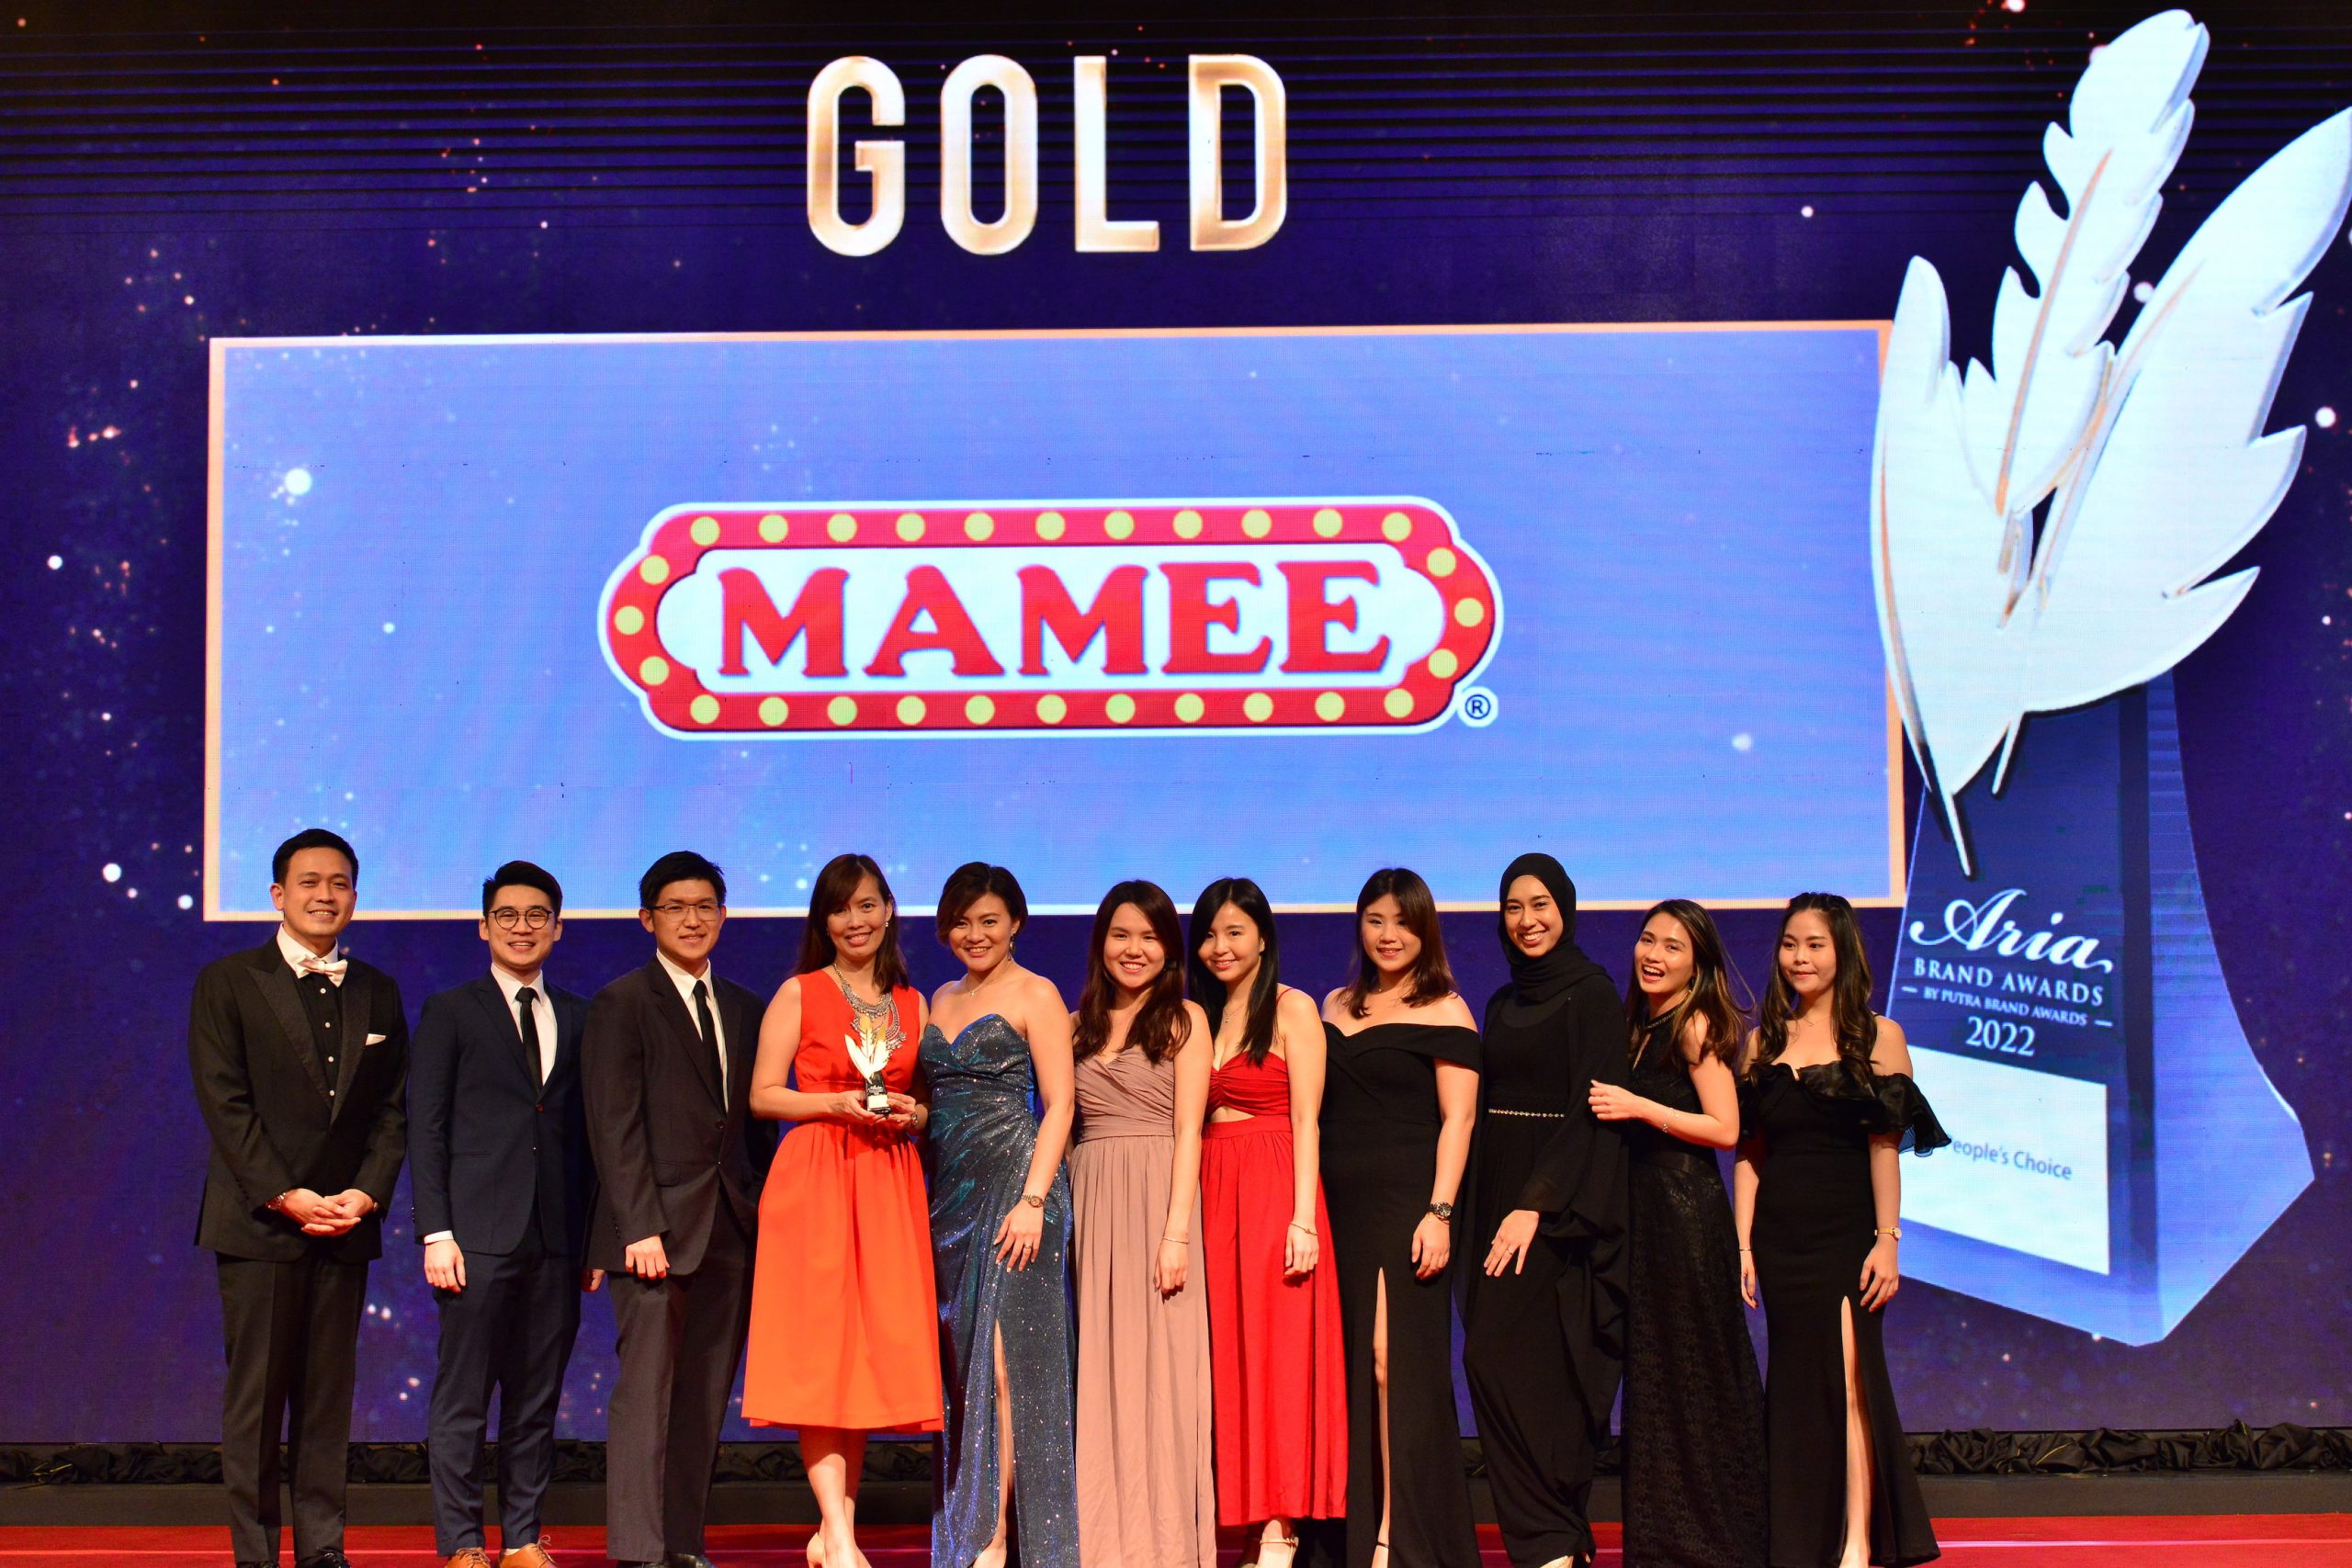 MAMEE wins Gold in Foodstuff category at Putra Aria Brand Awards 2022